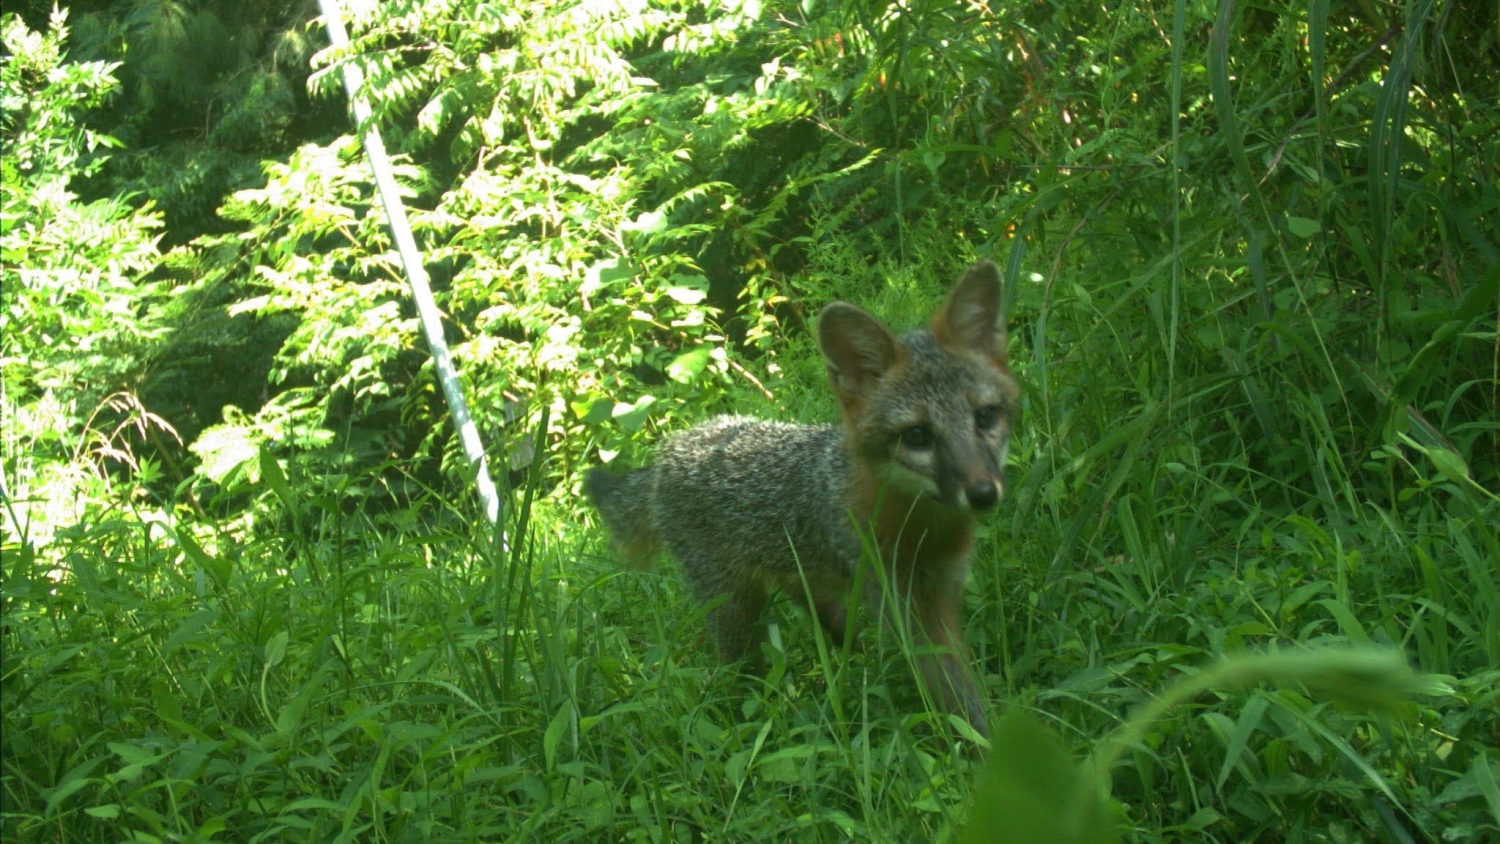 Gray fox - Tree Cover Helps Gray Foxes Coexist With Coyotes in the Country - Forestry and Environmental Resources NC State University